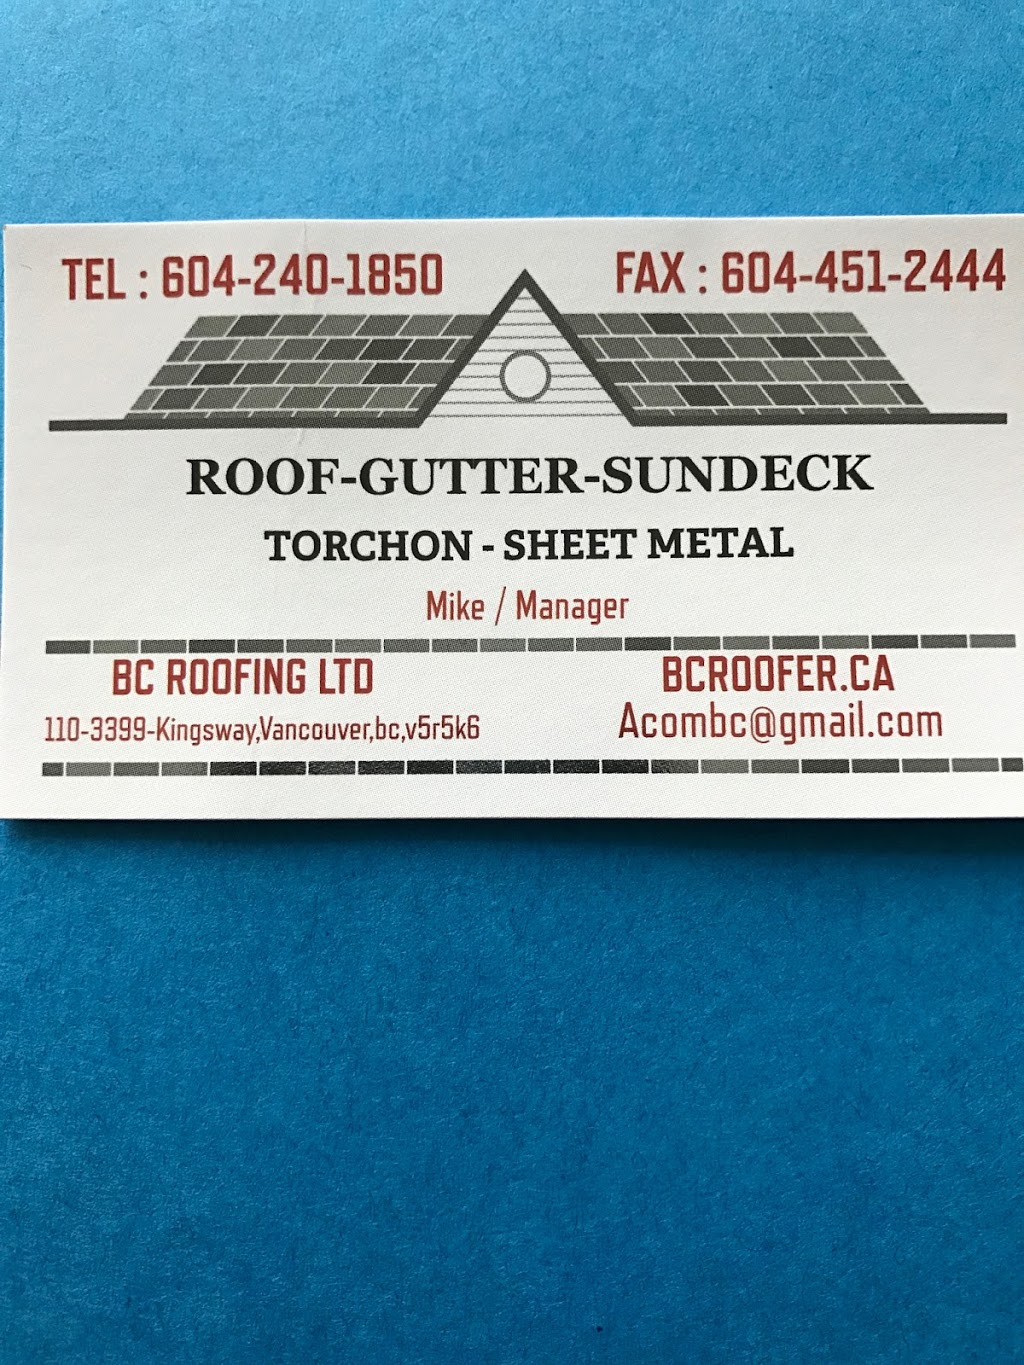 BC ROOFING LTD | 3399 Kingsway, Vancouver, BC V5R 6G7, Canada | Phone: (604) 240-1850